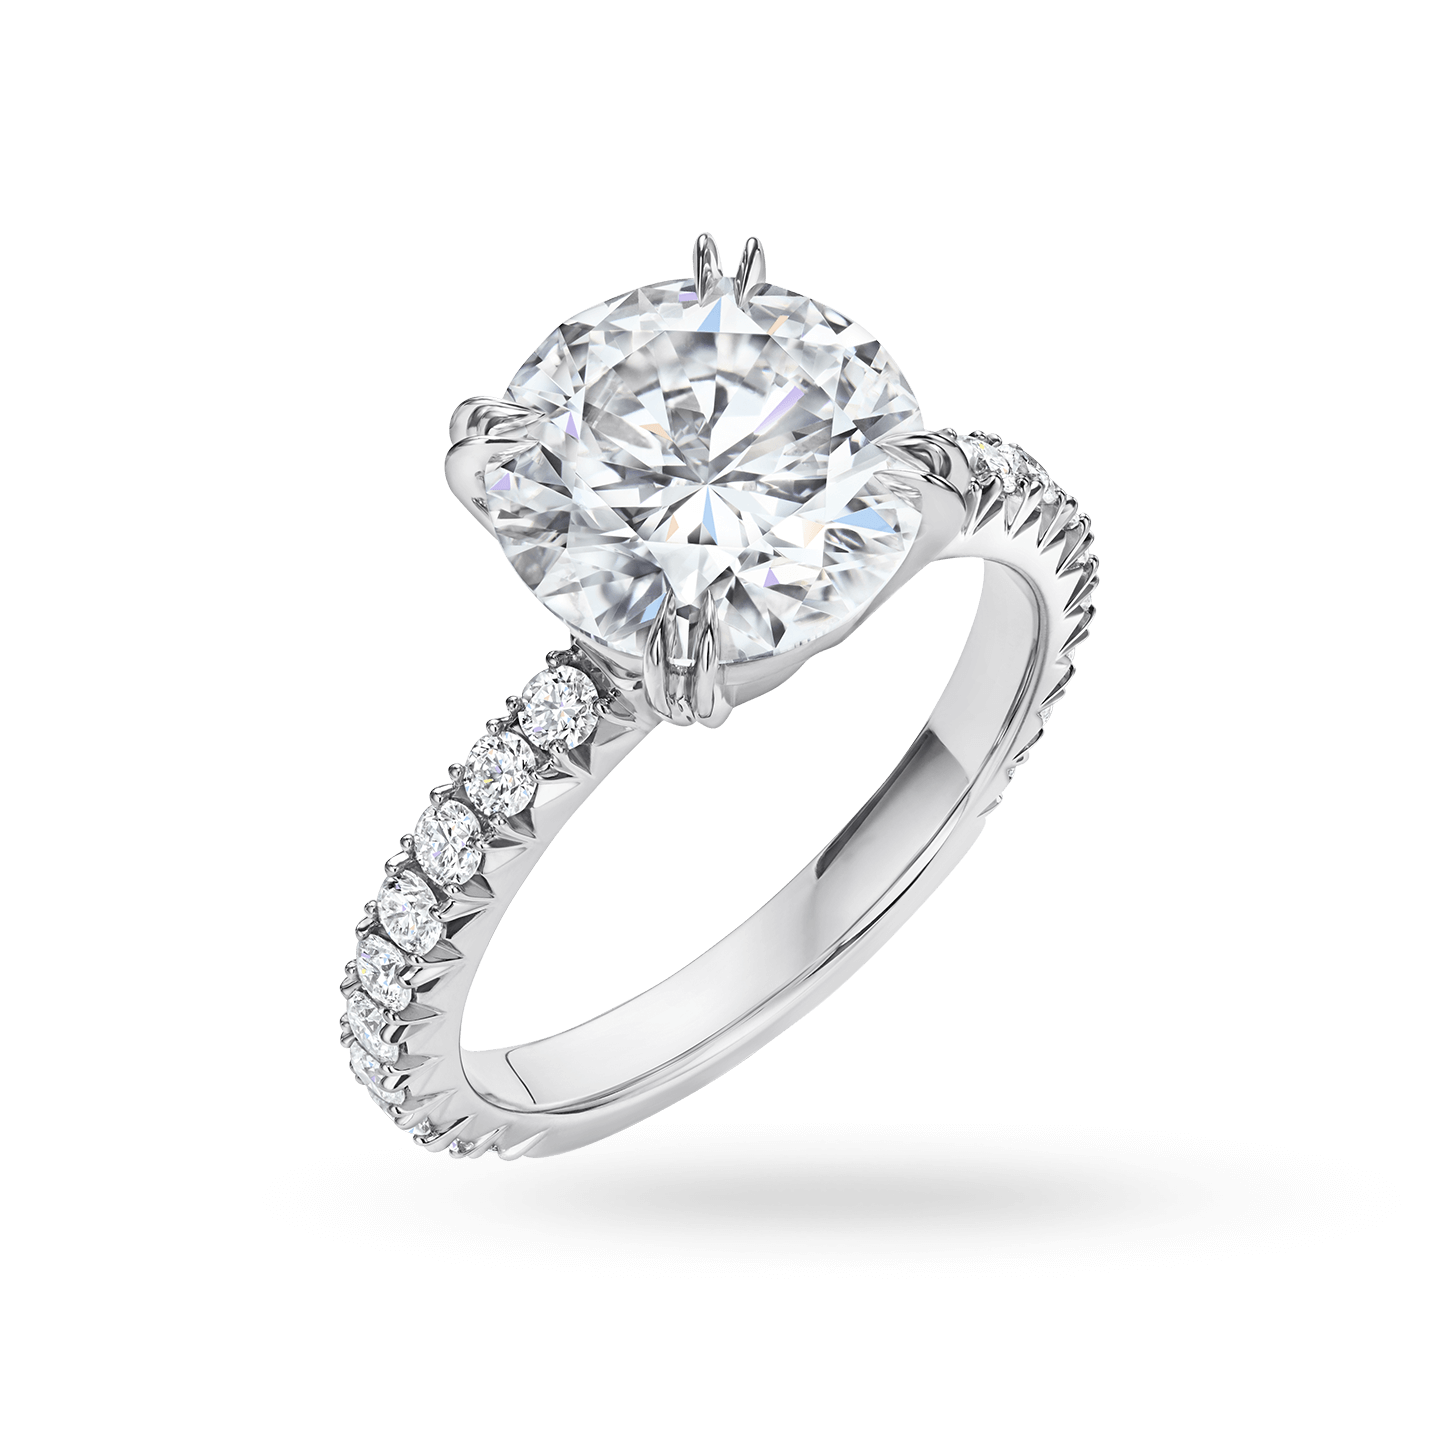 Harry Winston Engagement Ring pair with Diamond Necklace n Earrings |  Diamond jewelry designs, Creative jewelry photography, Harry winston  engagement rings